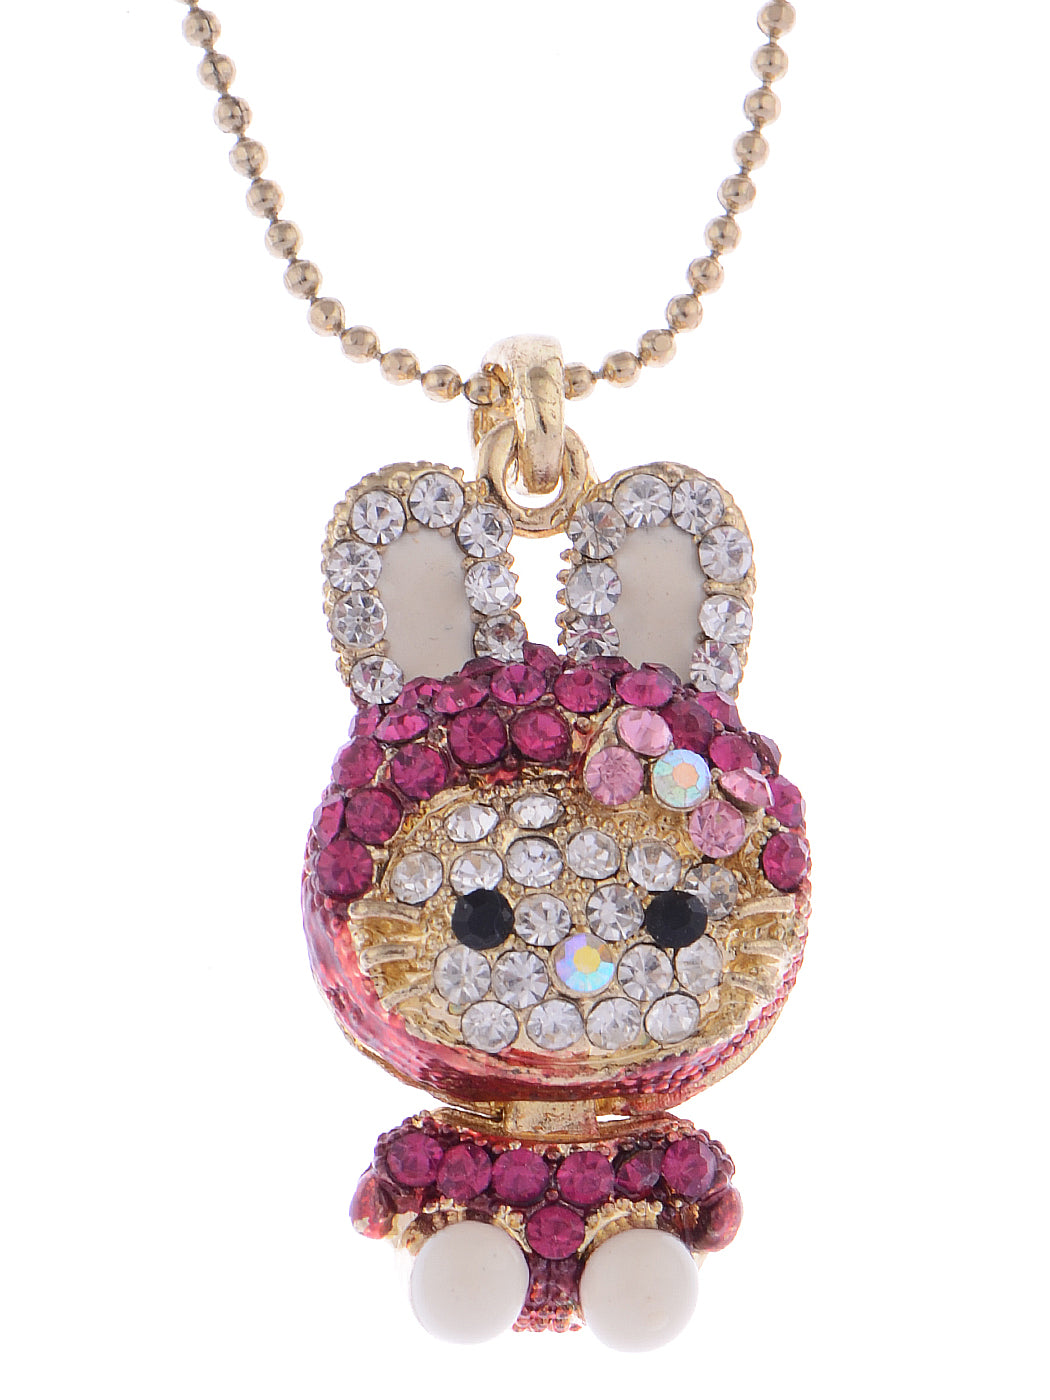 Hot Pink Bunny Girl Hooded Cat Kitty Face Rabbit Pendant Necklace